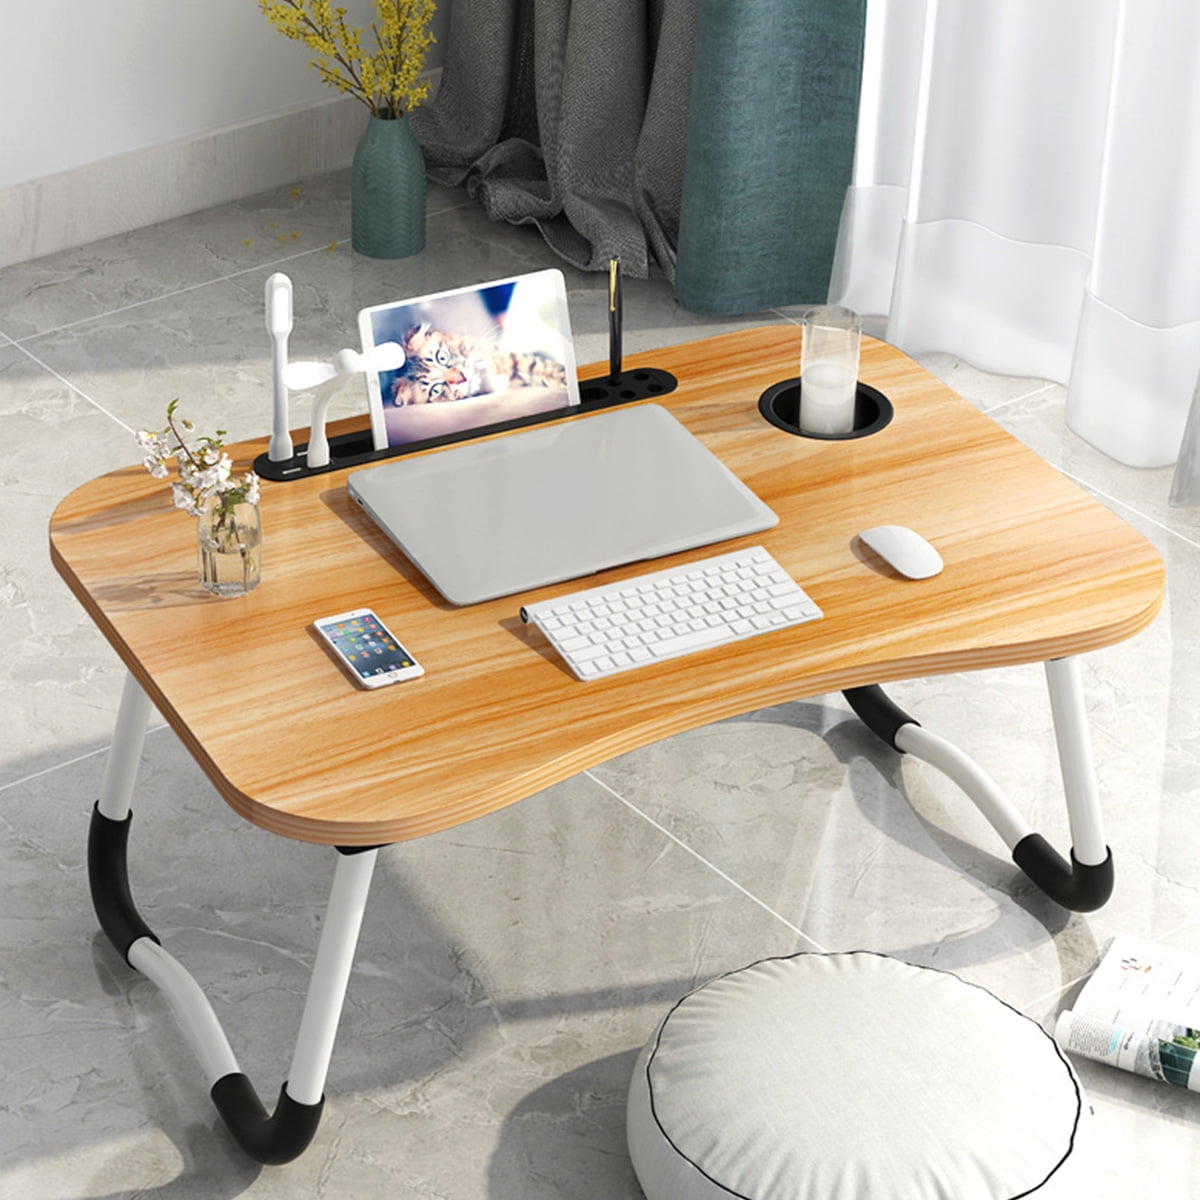 FOLDABLE PORTABLE LAP TABLE DESK STAND SOFA BREAKFAST BED TRAY TABLET LAPTOP 